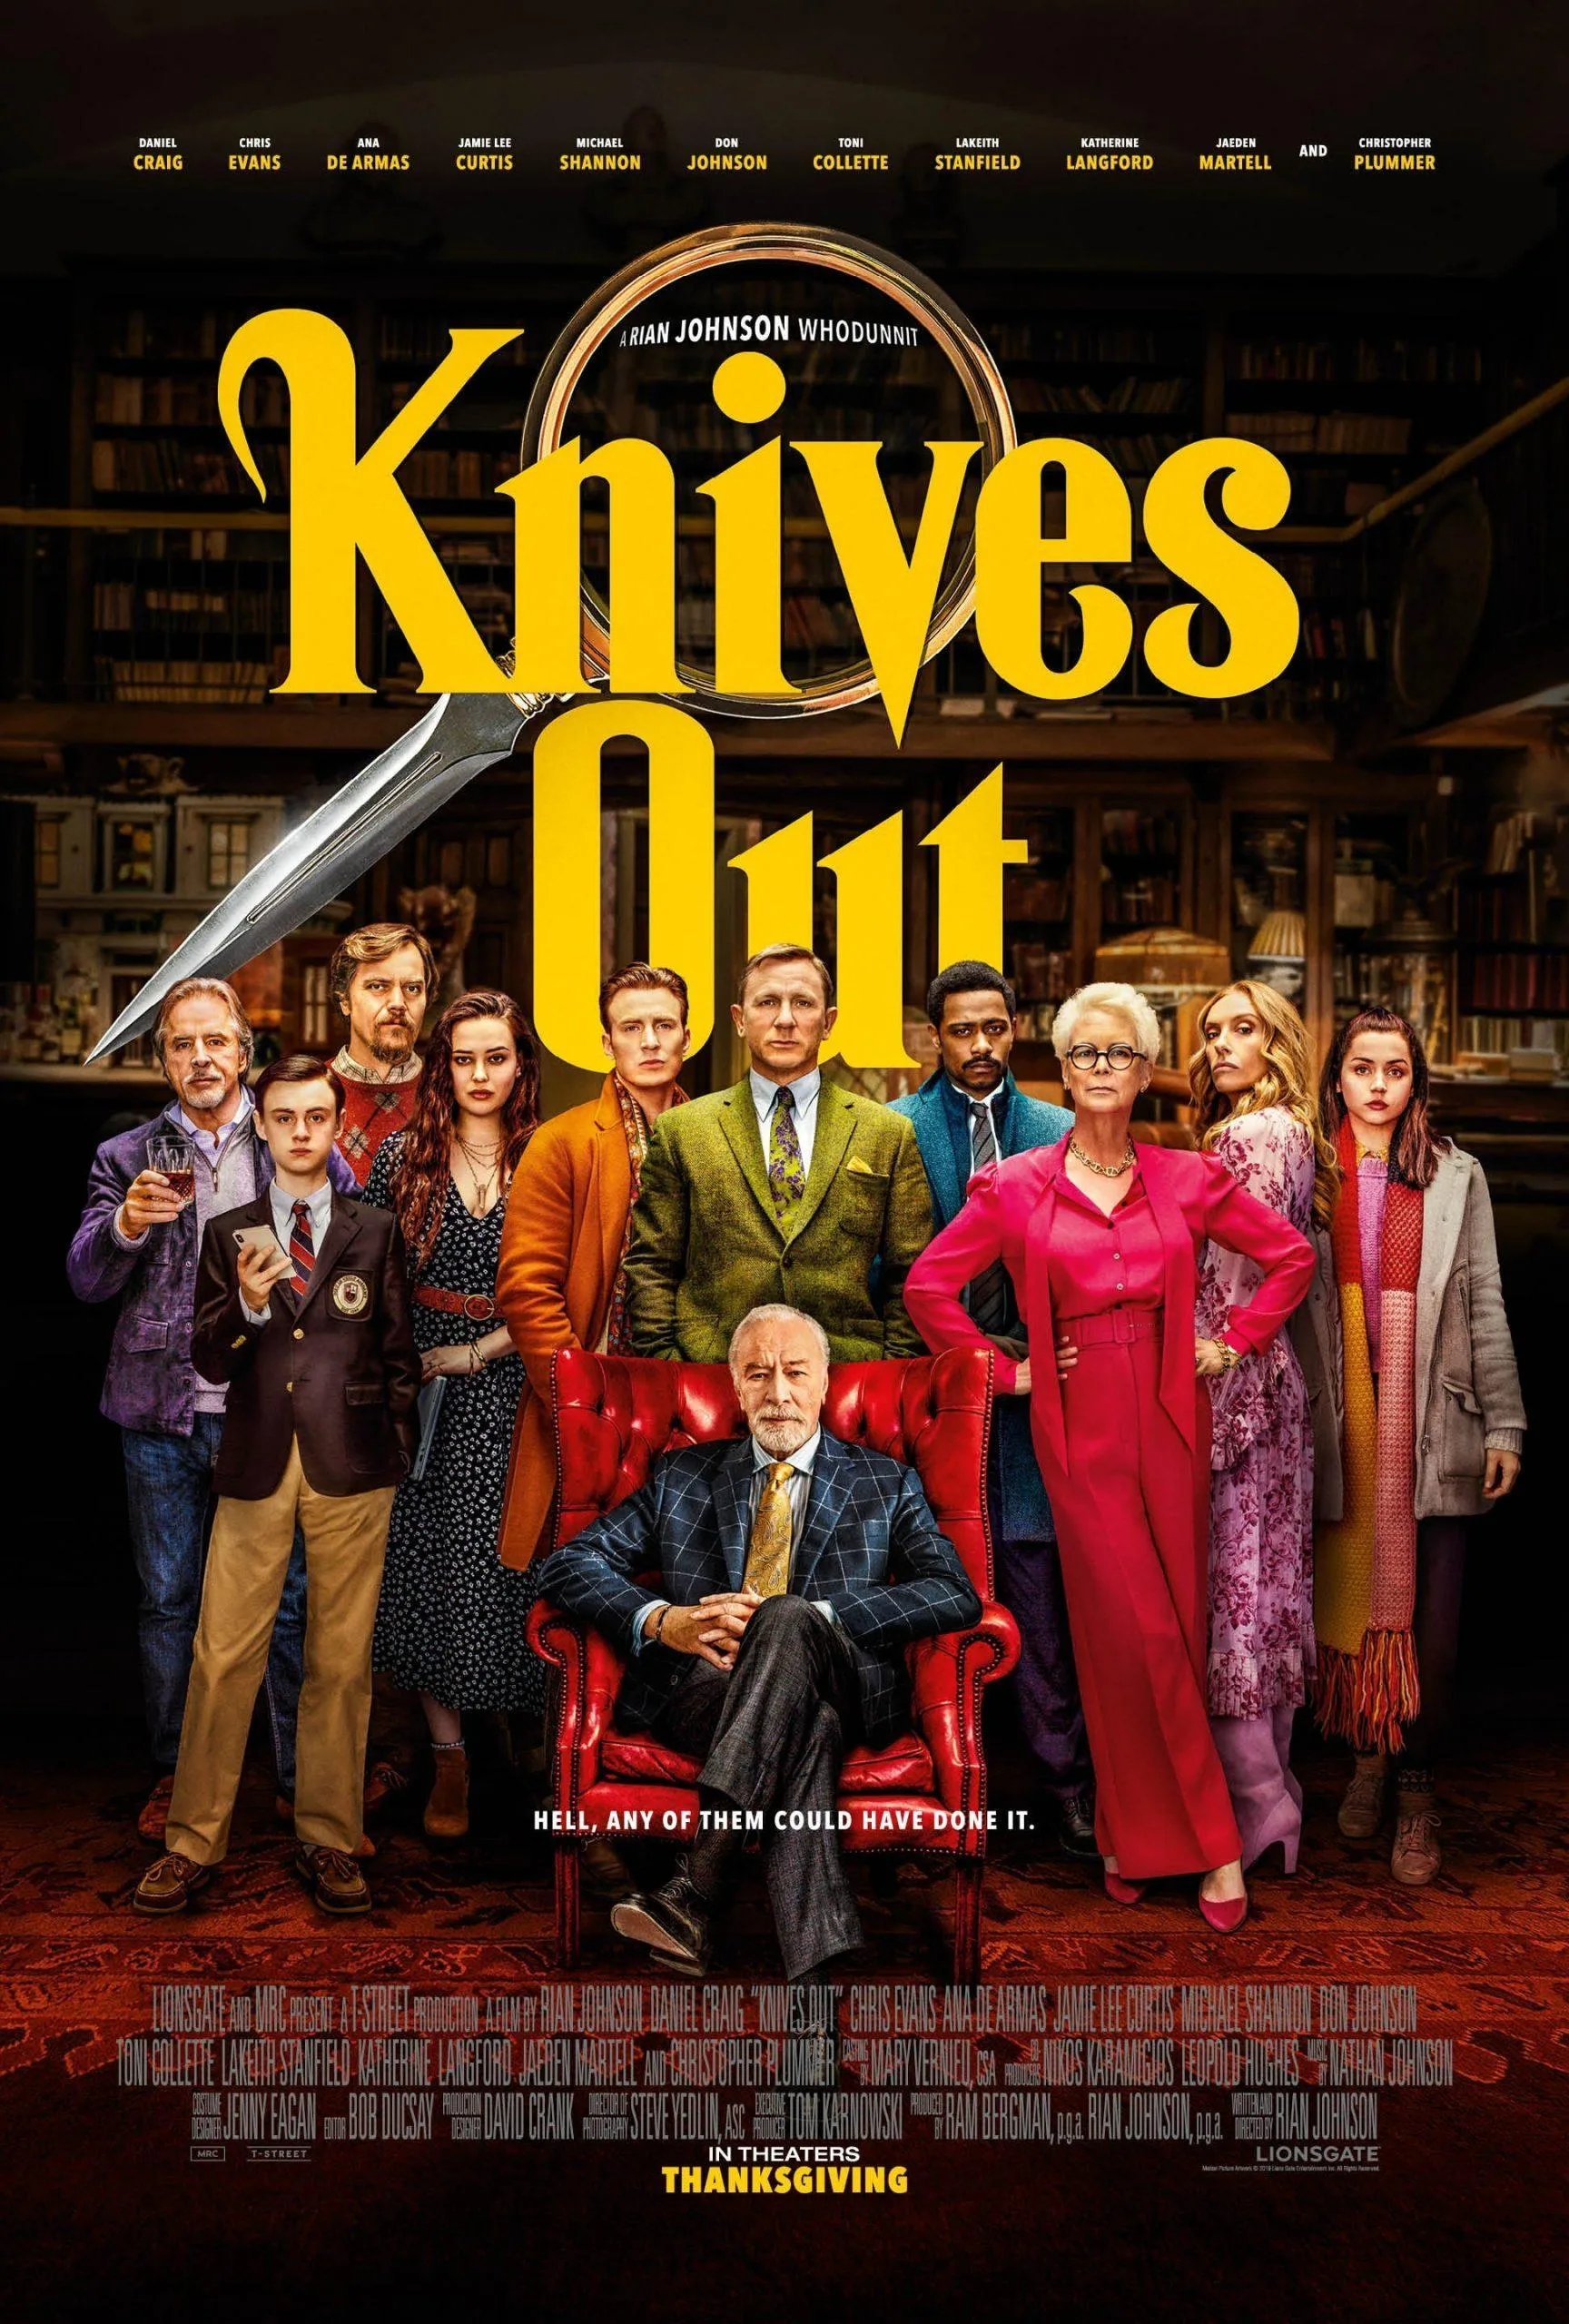 Knives-Out